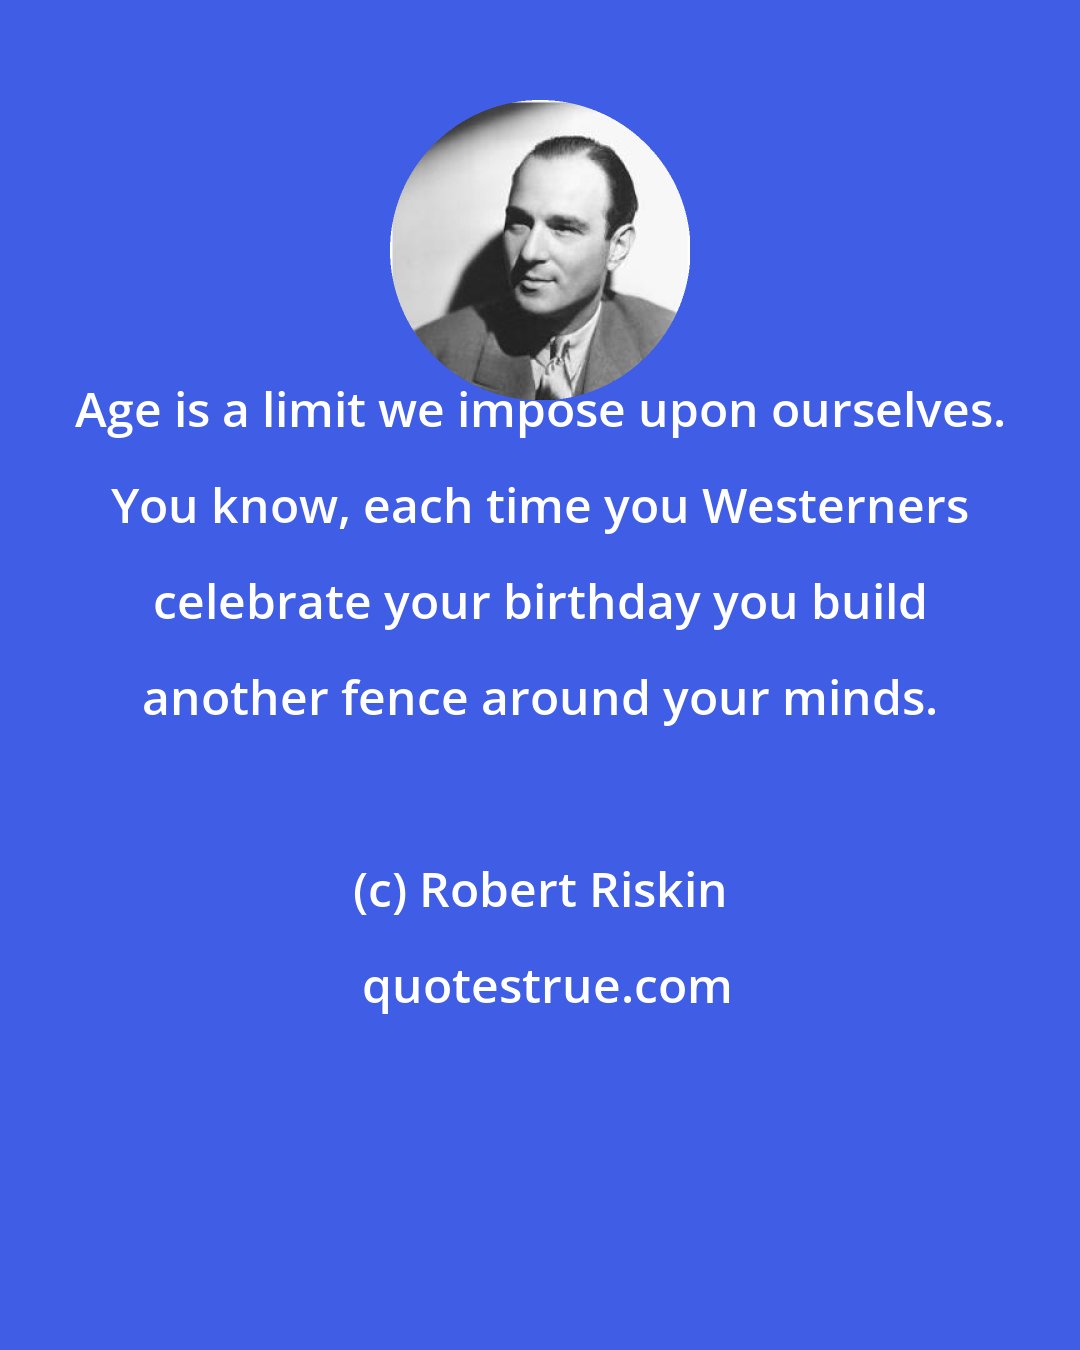 Robert Riskin: Age is a limit we impose upon ourselves. You know, each time you Westerners celebrate your birthday you build another fence around your minds.